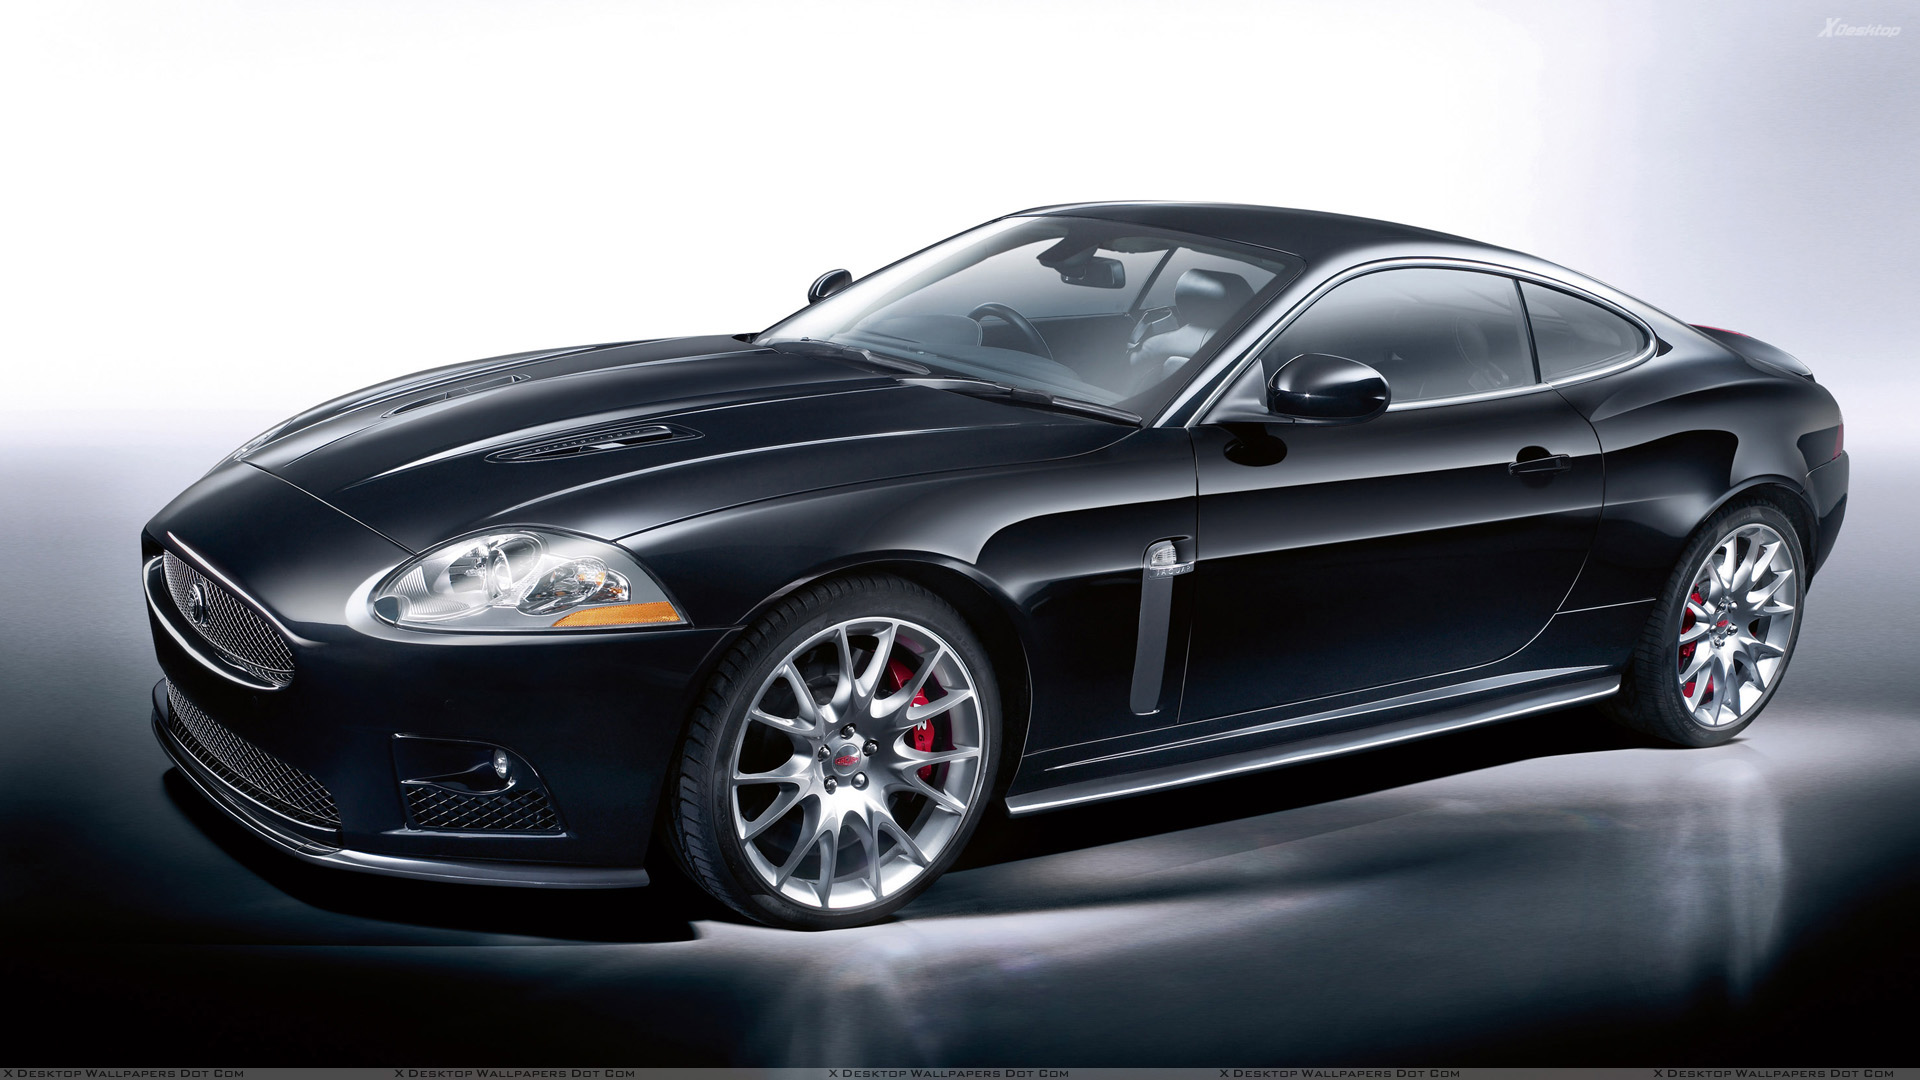 Jaguar XKR S Wallpapers Photos Images in HD